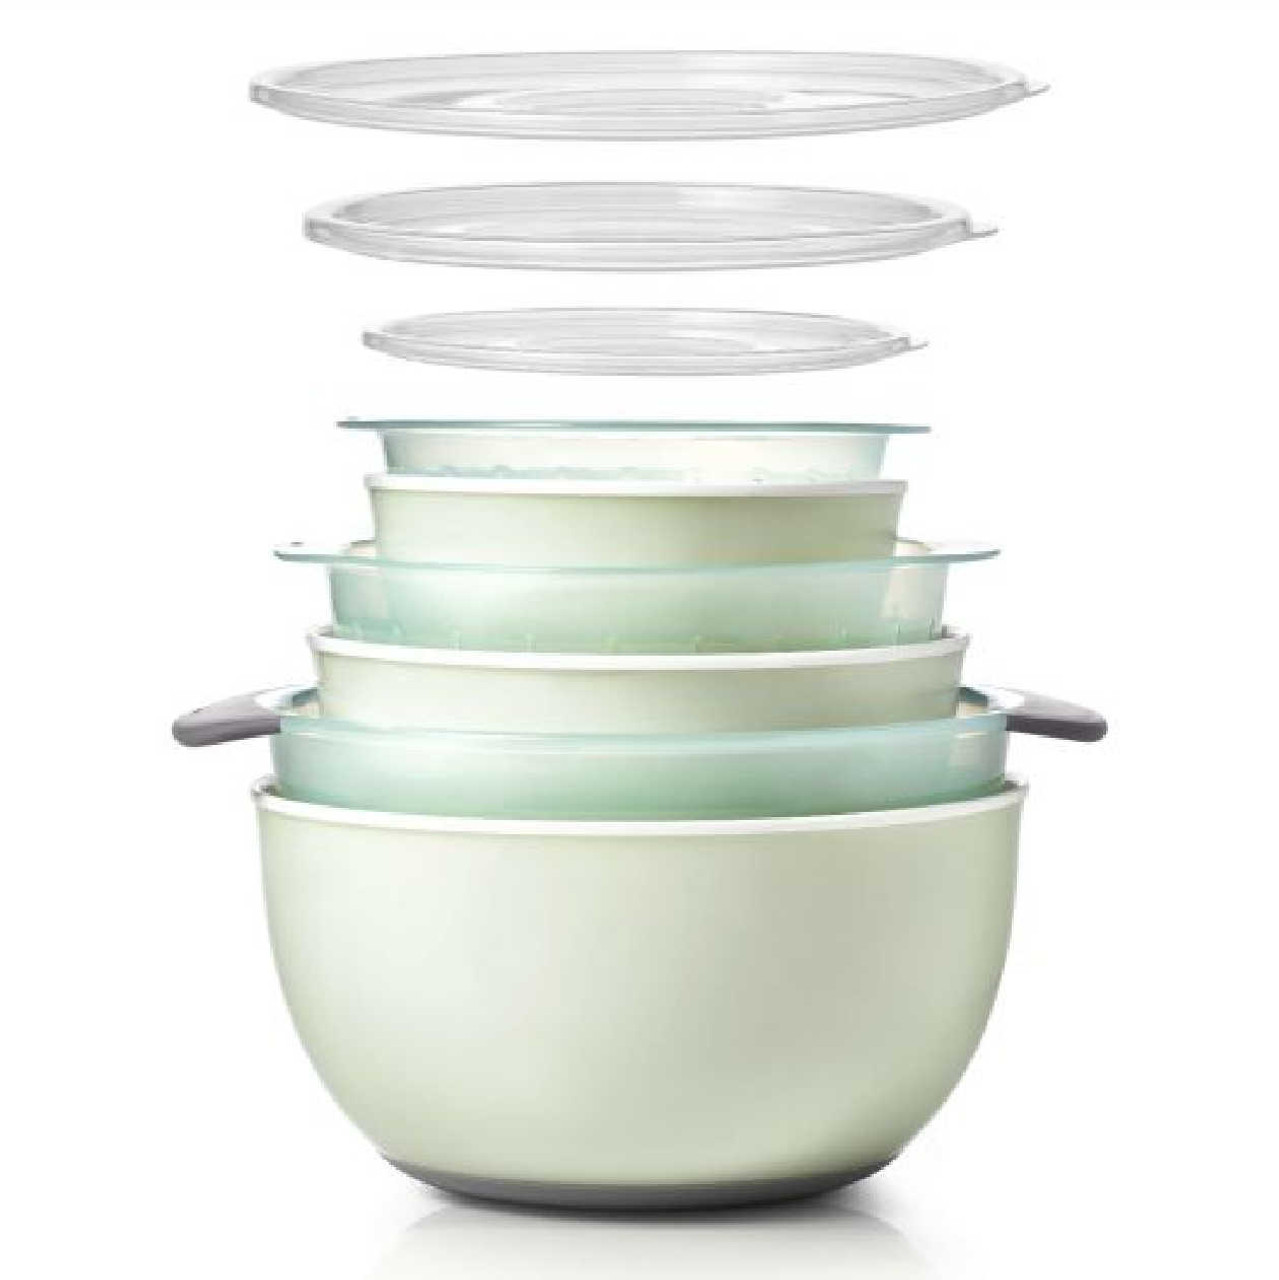 OXO Good Grips 9-Piece Nesting Bowls and Colanders Set